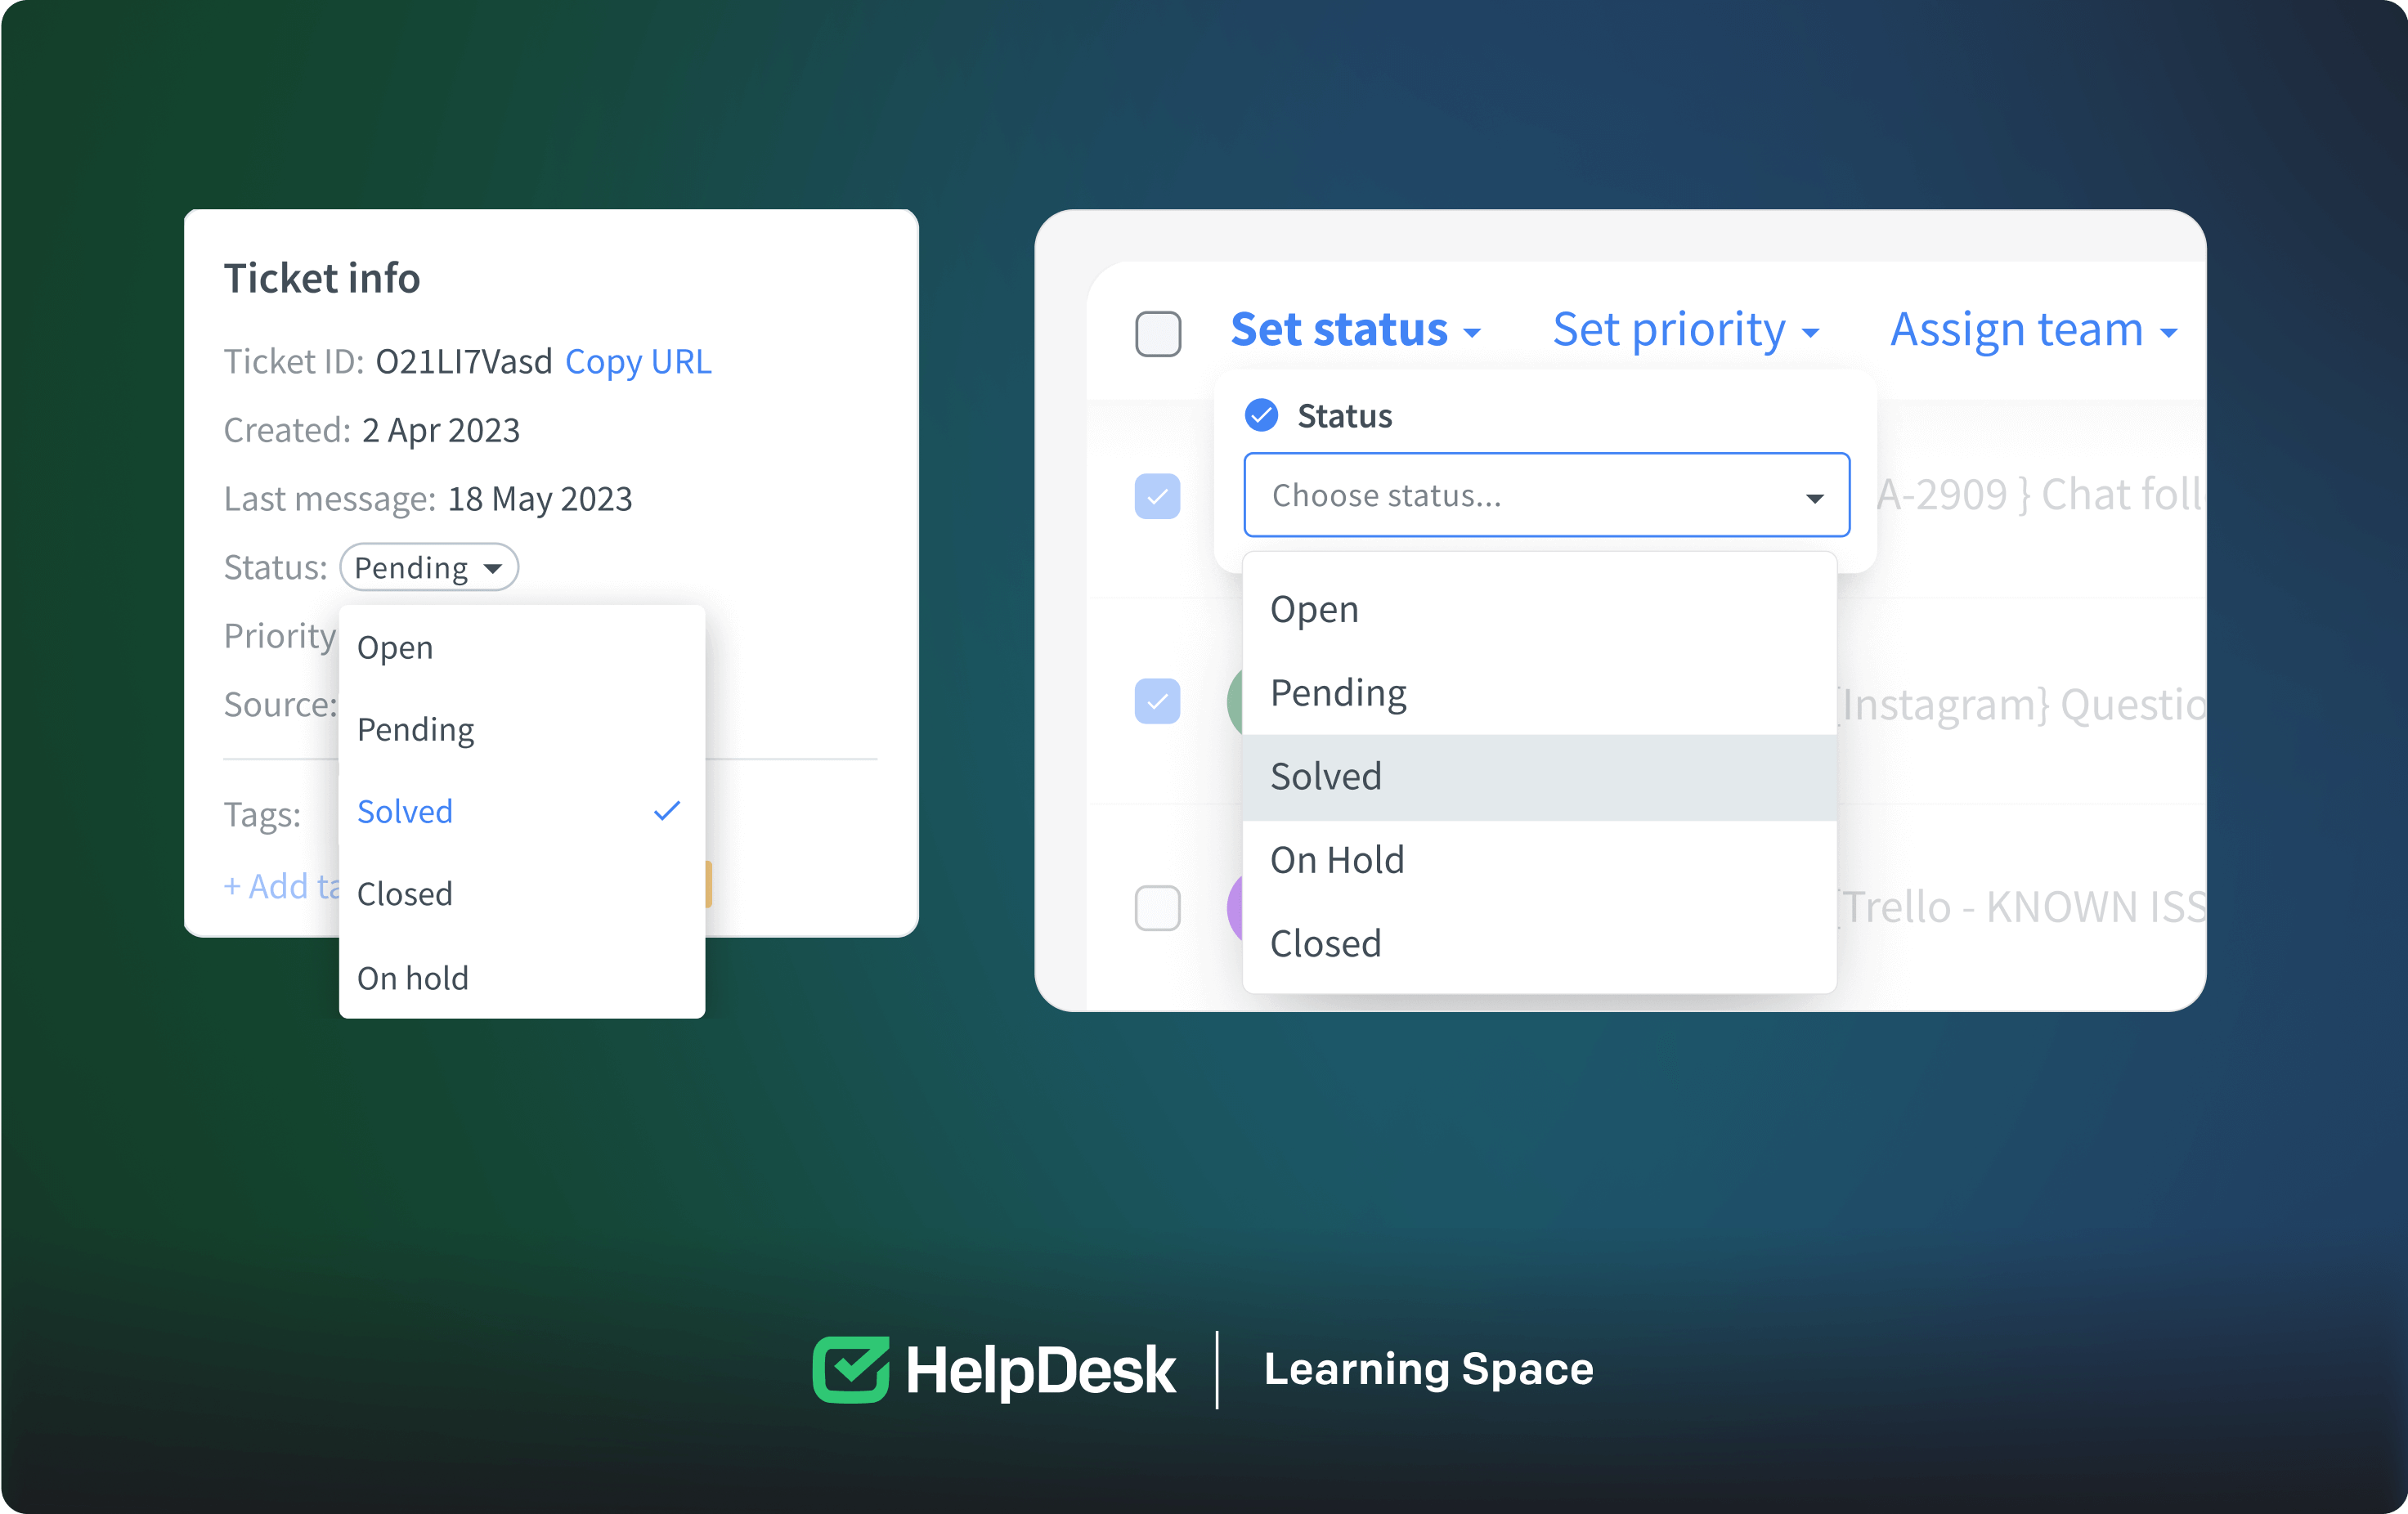 Different statuses of the ticket in the HelpDesk App